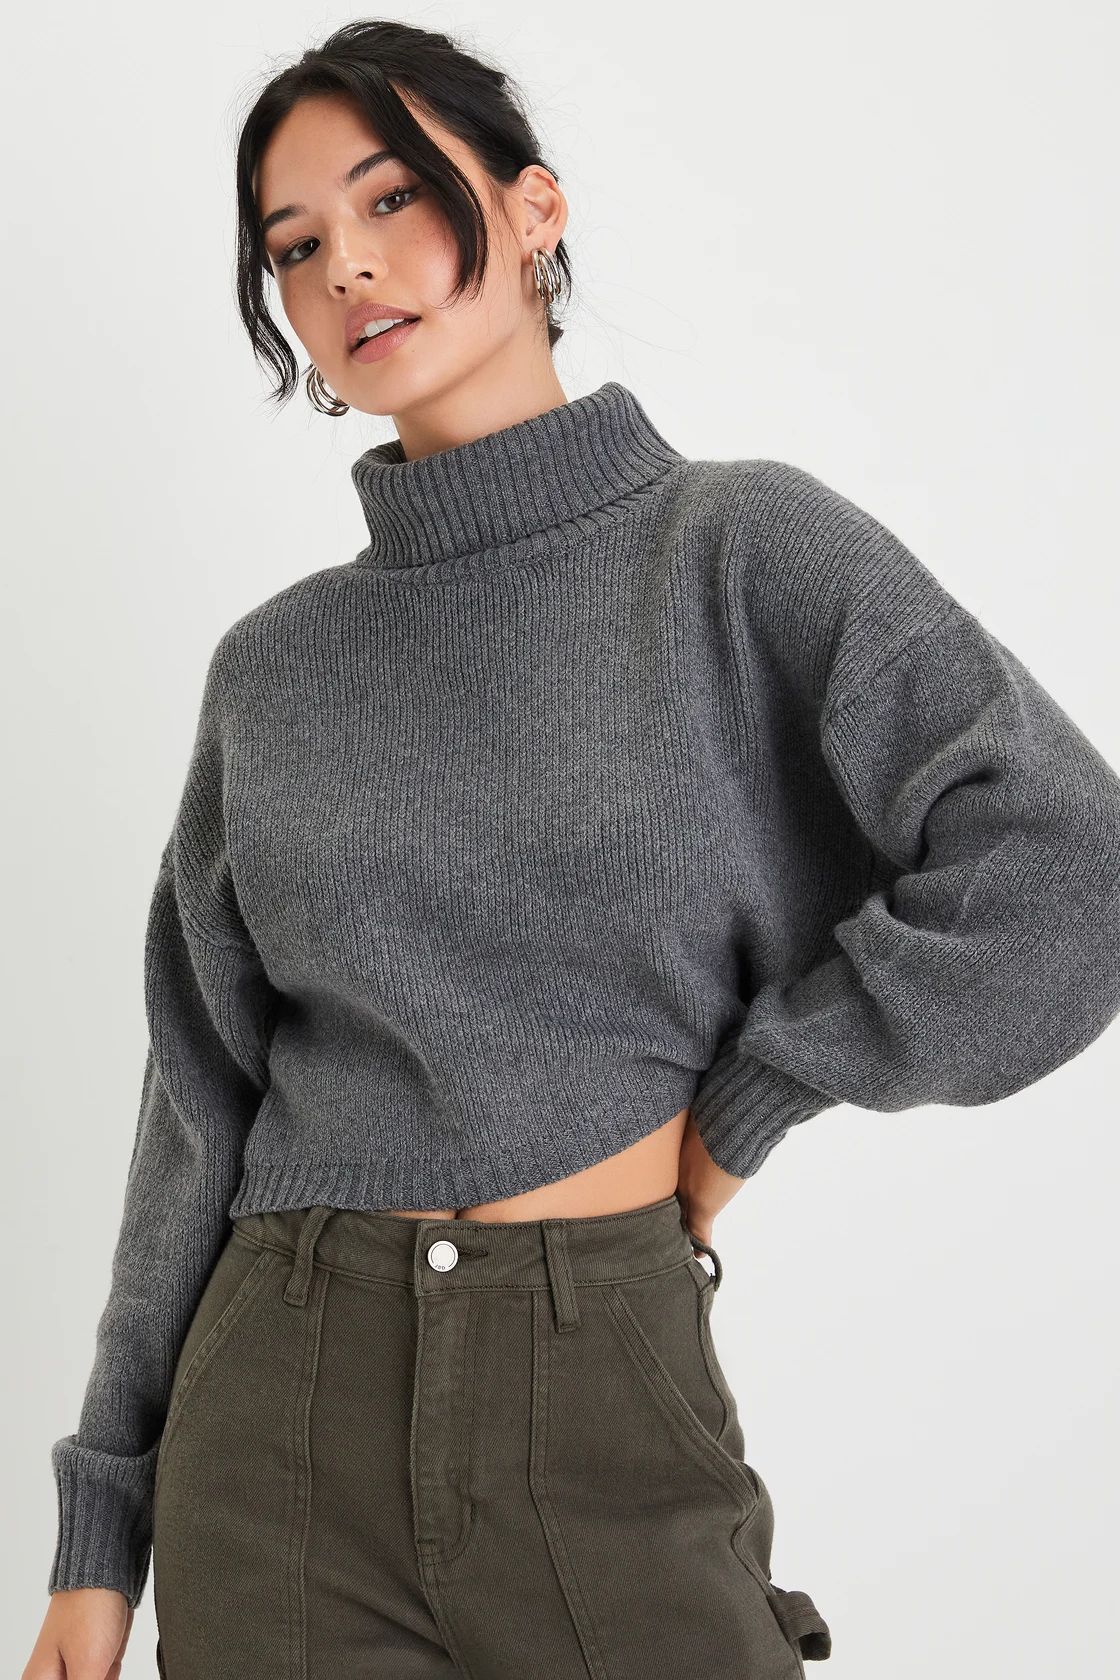 Comfy Intentions Dark Grey Turtleneck Cropped Pullover Sweater | Lulus